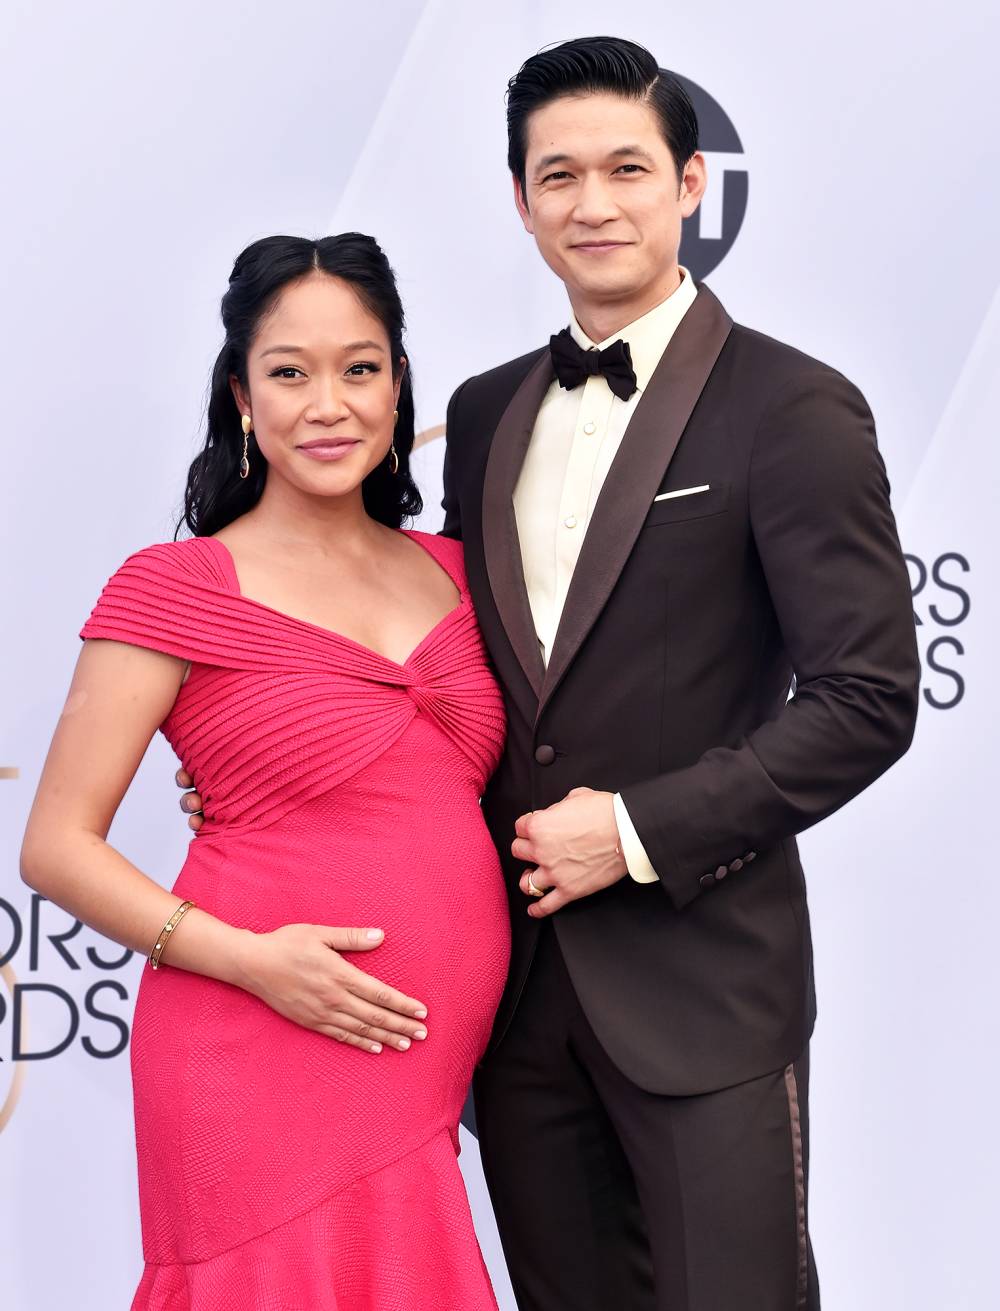 Harry Shum Jr.'s Wife Shelby Rabara Gives Birth to Their First Child Together